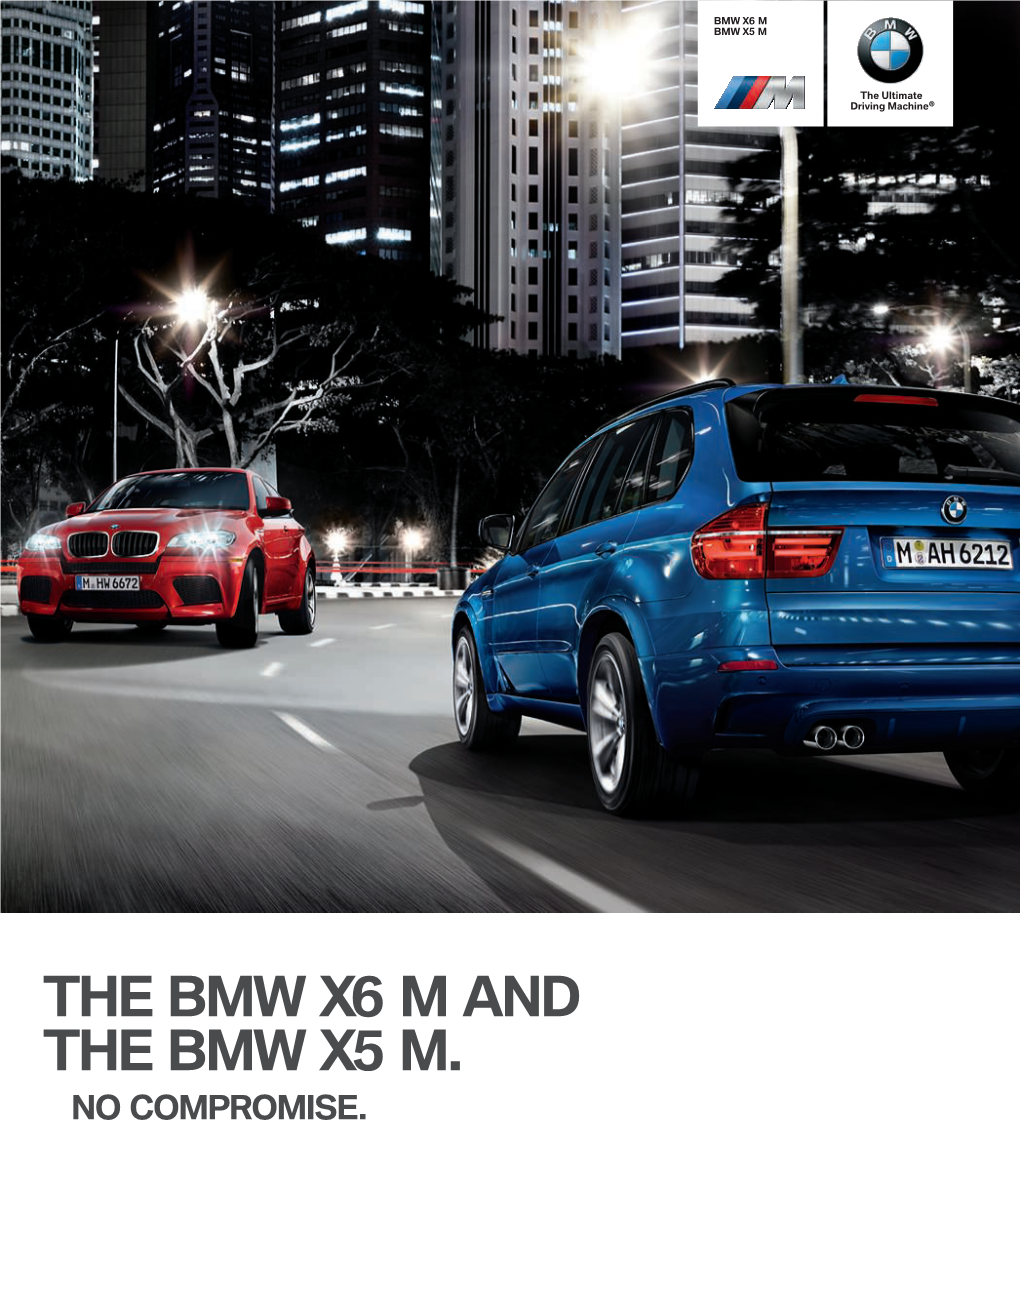 The Bmw X M and the Bmw X